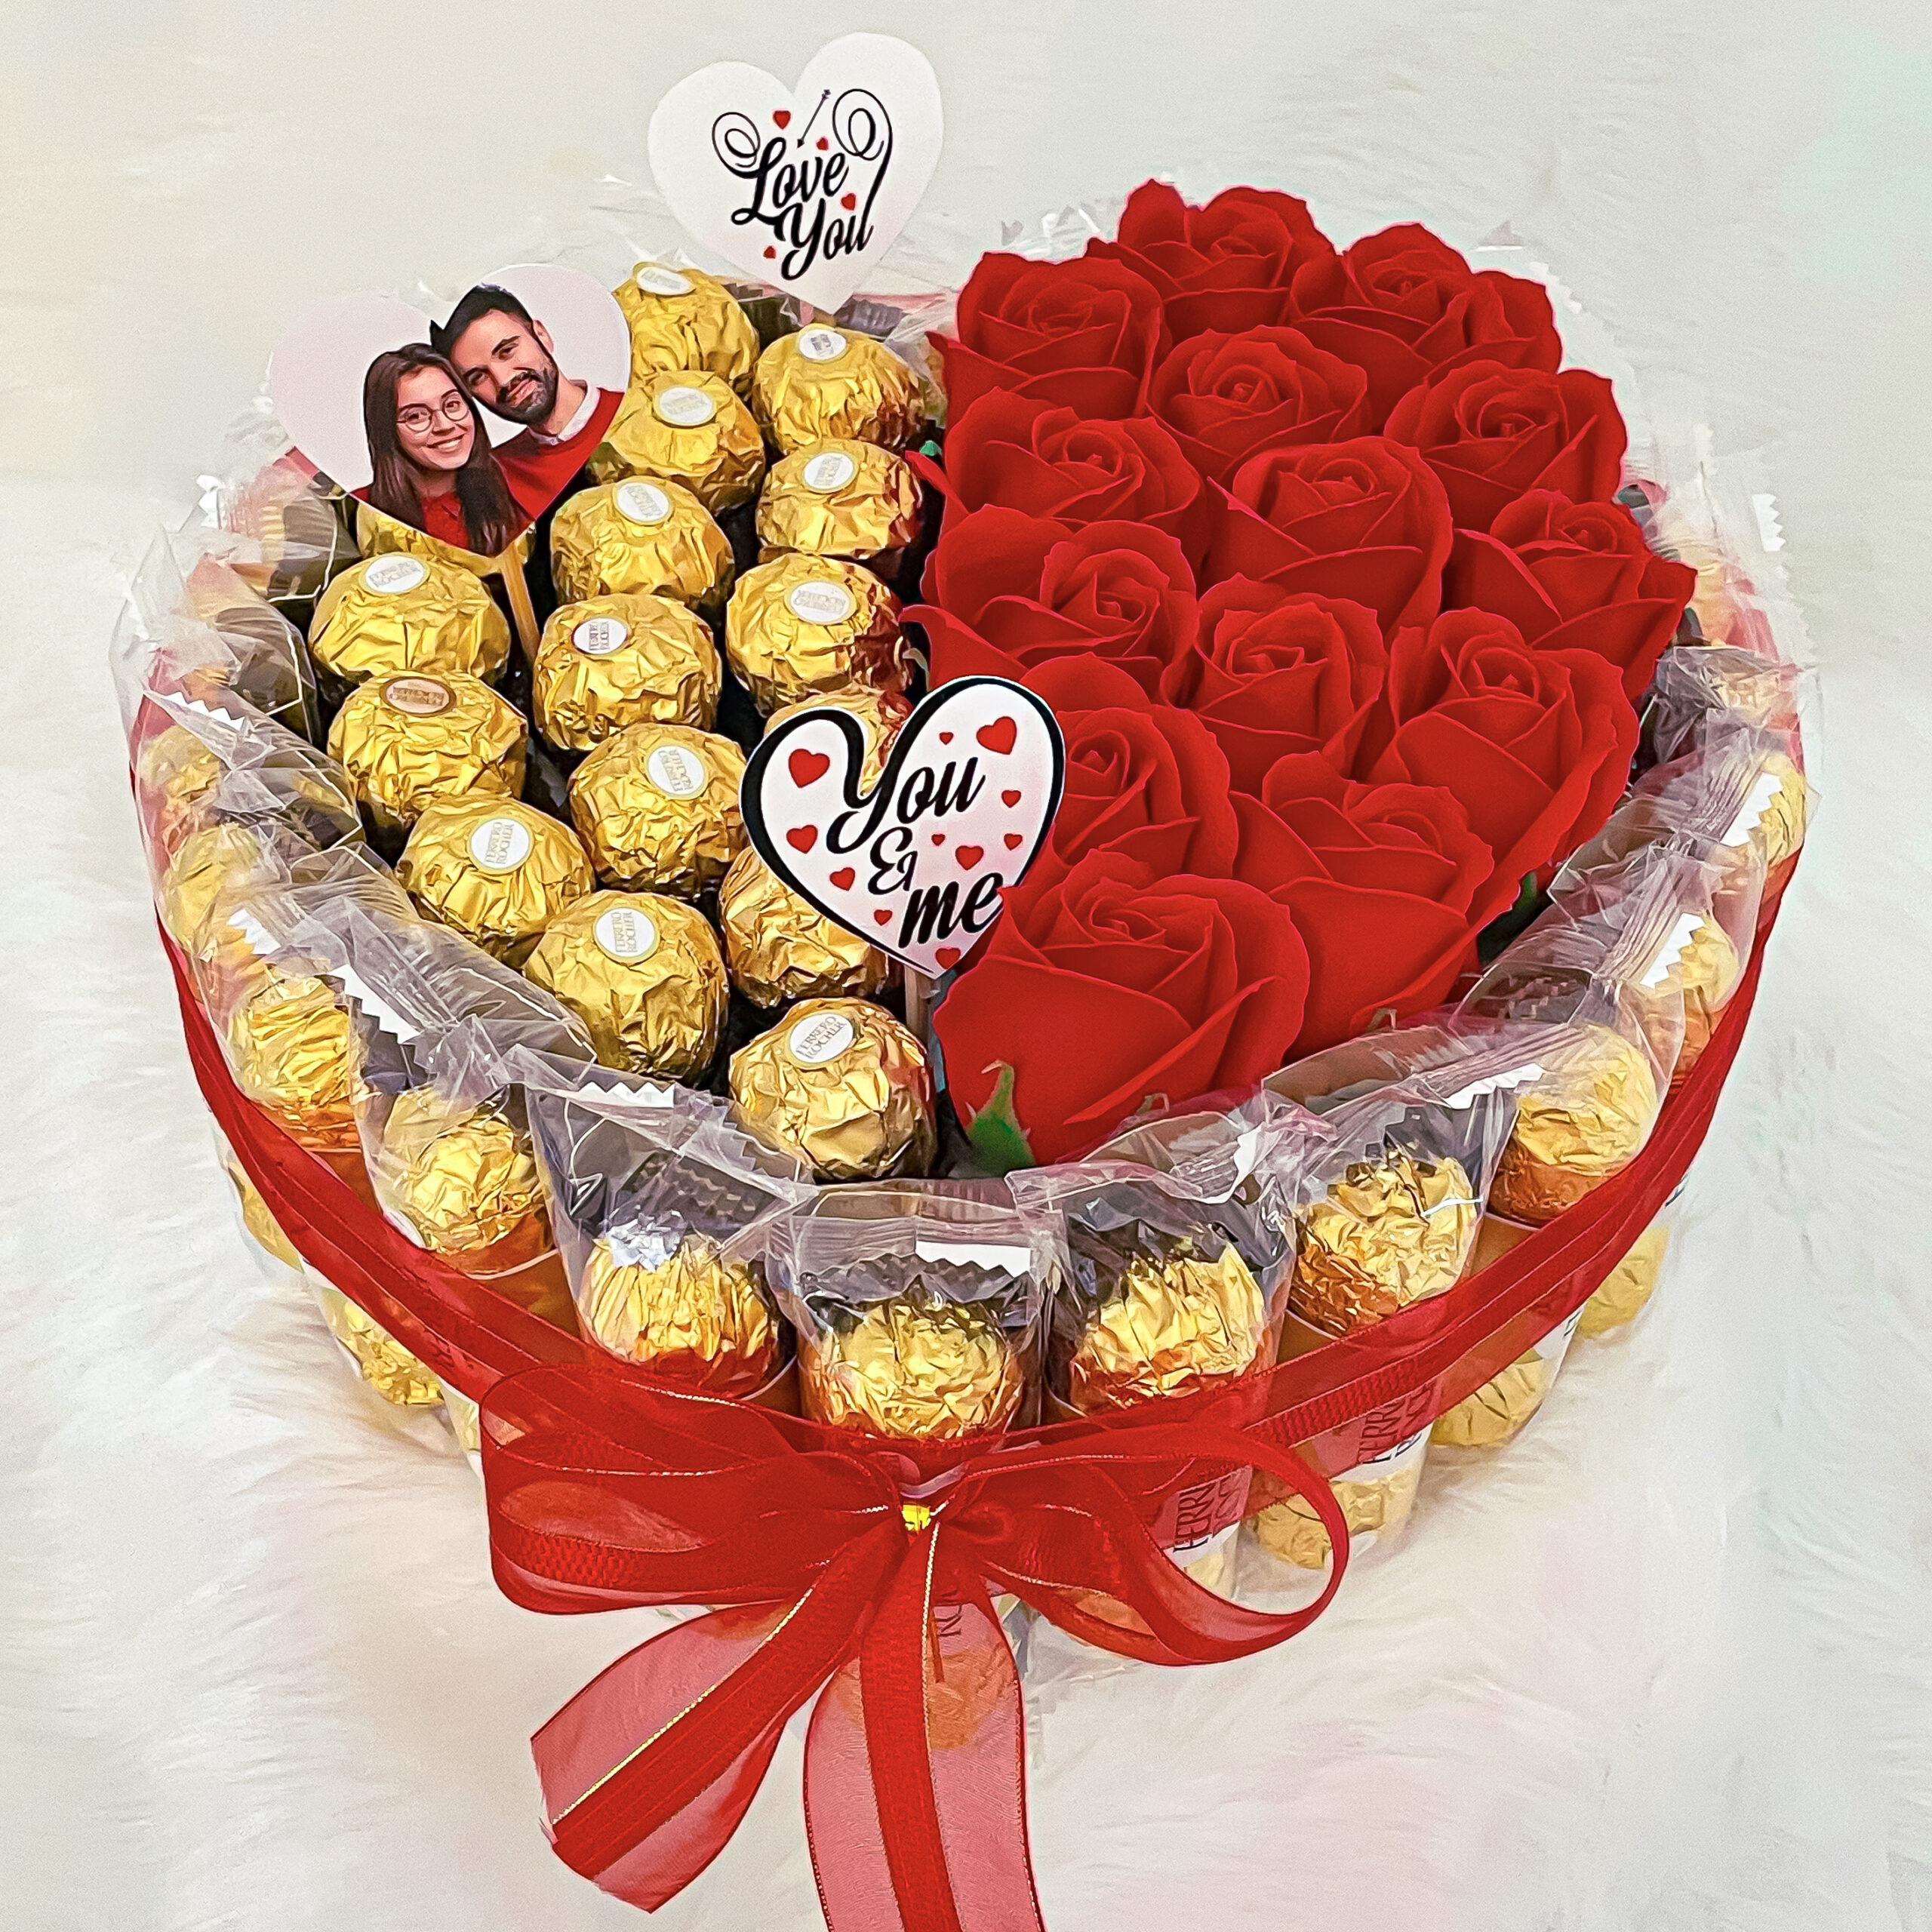 Buy Chocolates Online | Chocolate gifts Delivery in 3 hours-Winni